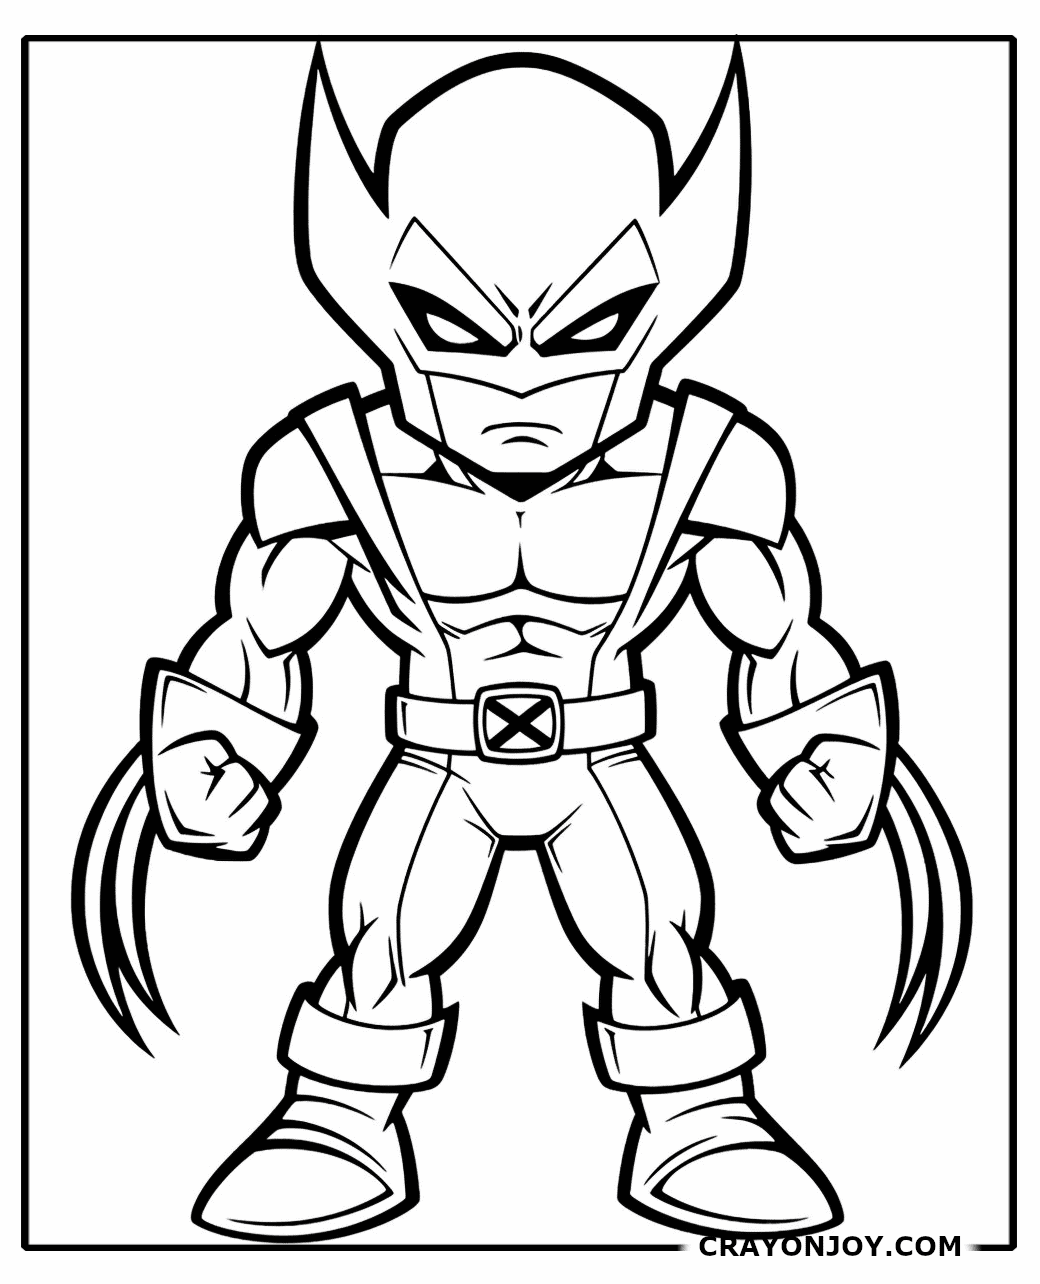 Free Printable Wolverine Coloring Pages for Kids and Adults